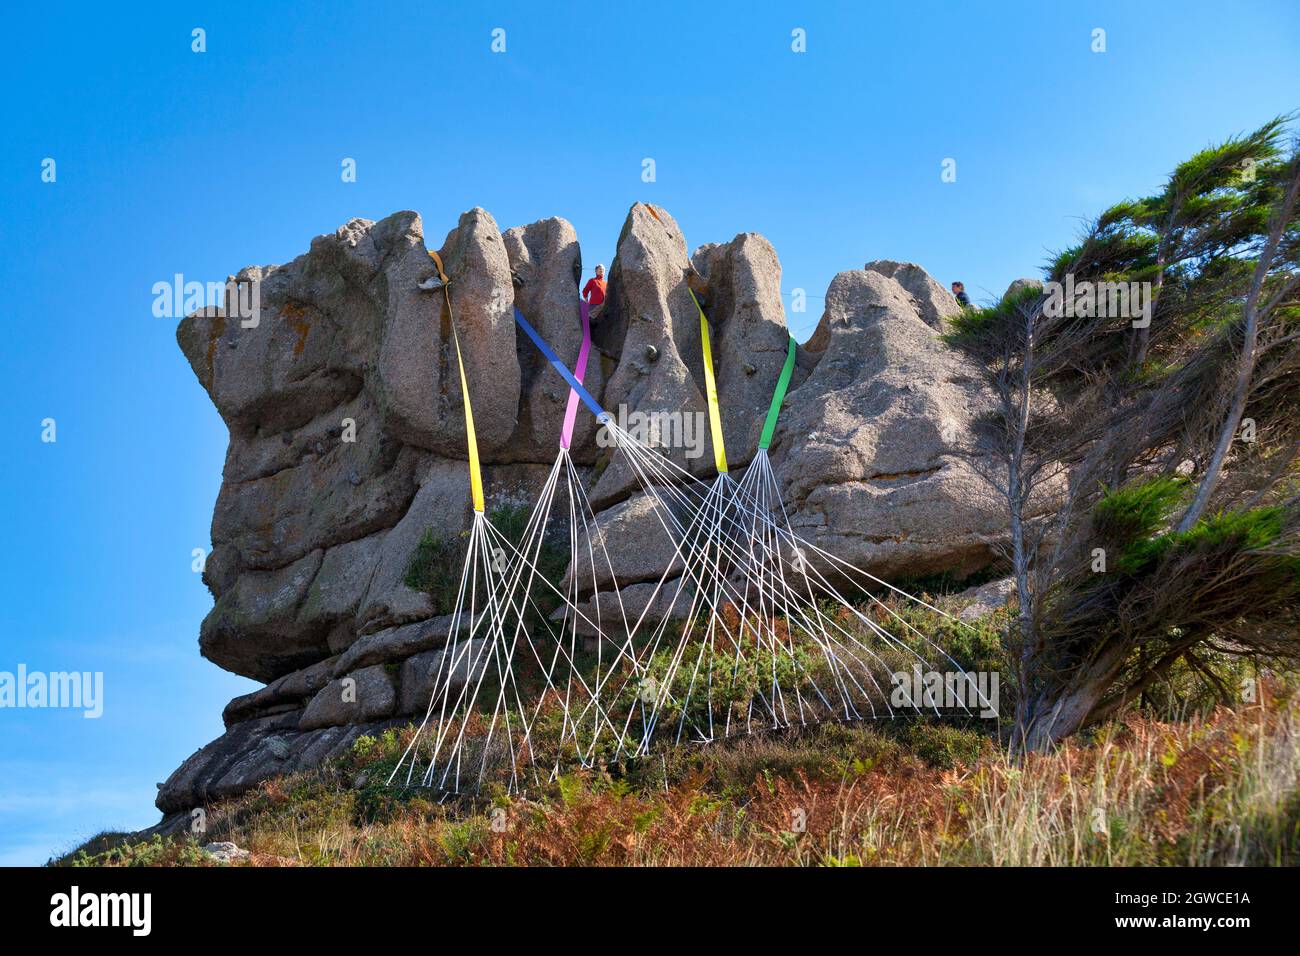 Trégastel, France - September 21 2021: The Crown of King Gradlon is a granite chaos along the coast that is very popular amongst tourists. Stock Photo